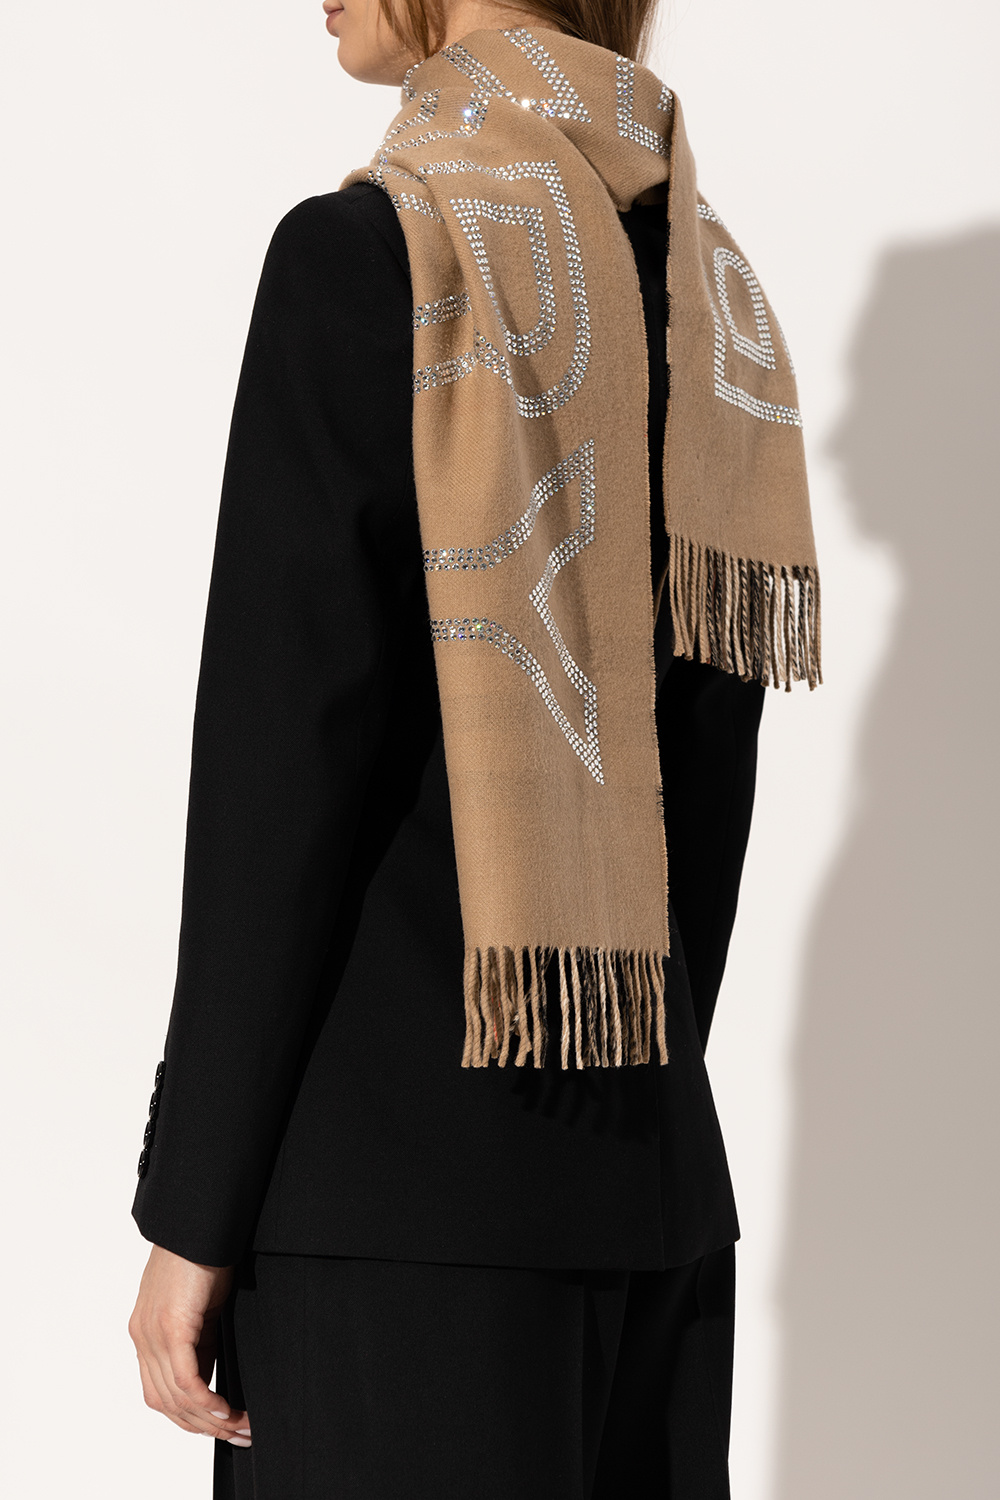 burberry tie-cuff Reversible scarf with crystals